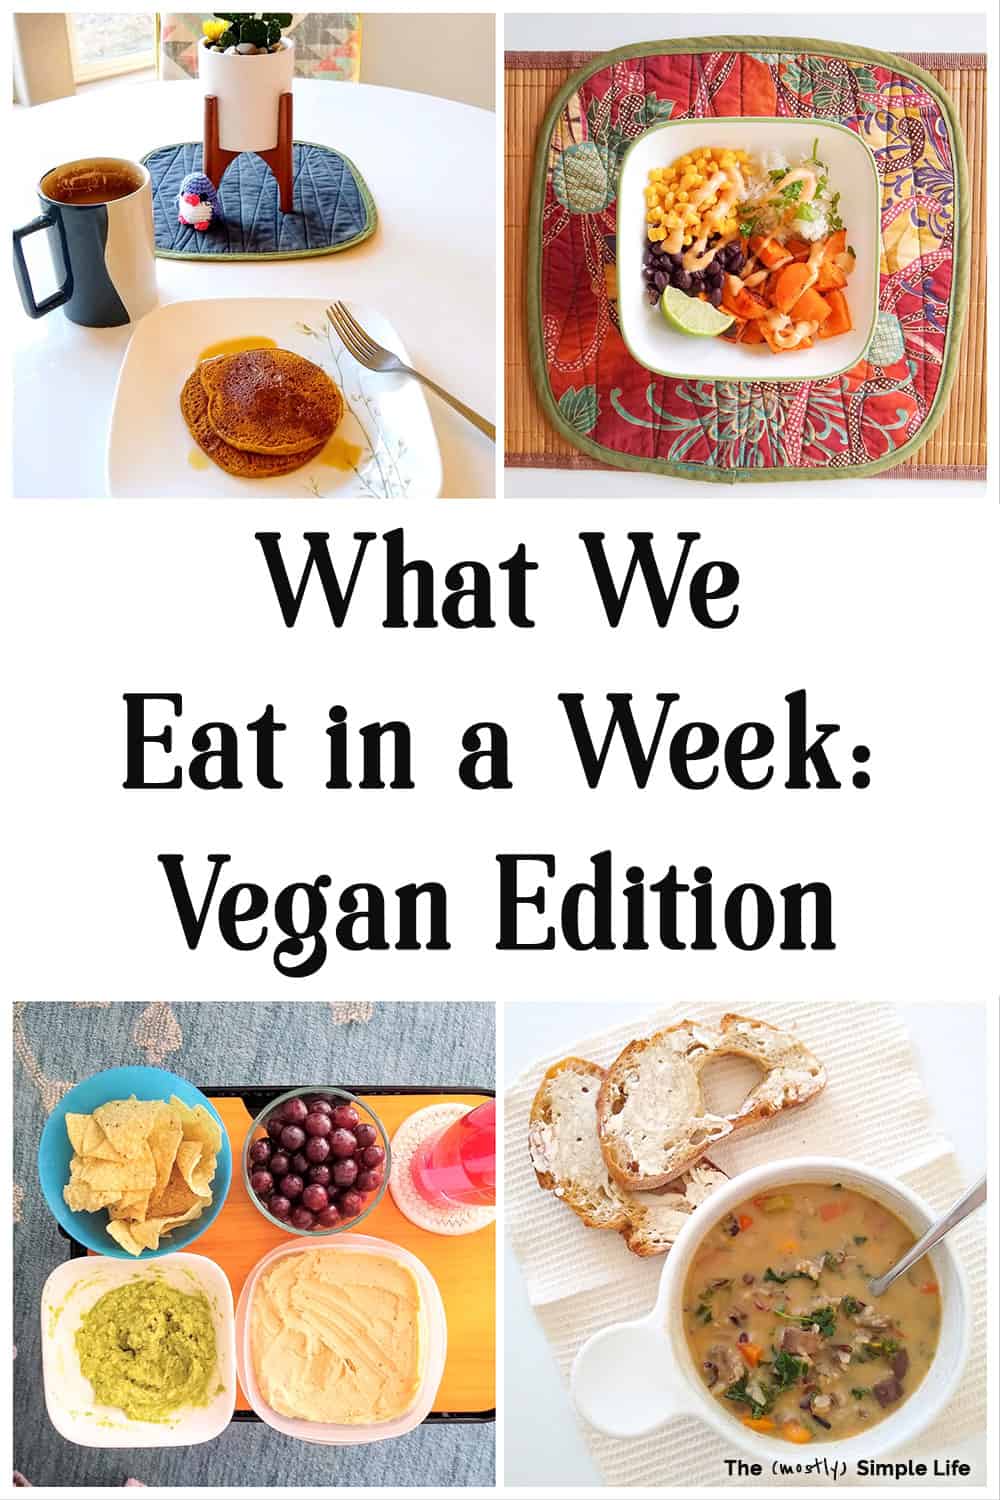 Our Vegan Meal Plan: What We Eat in a Week